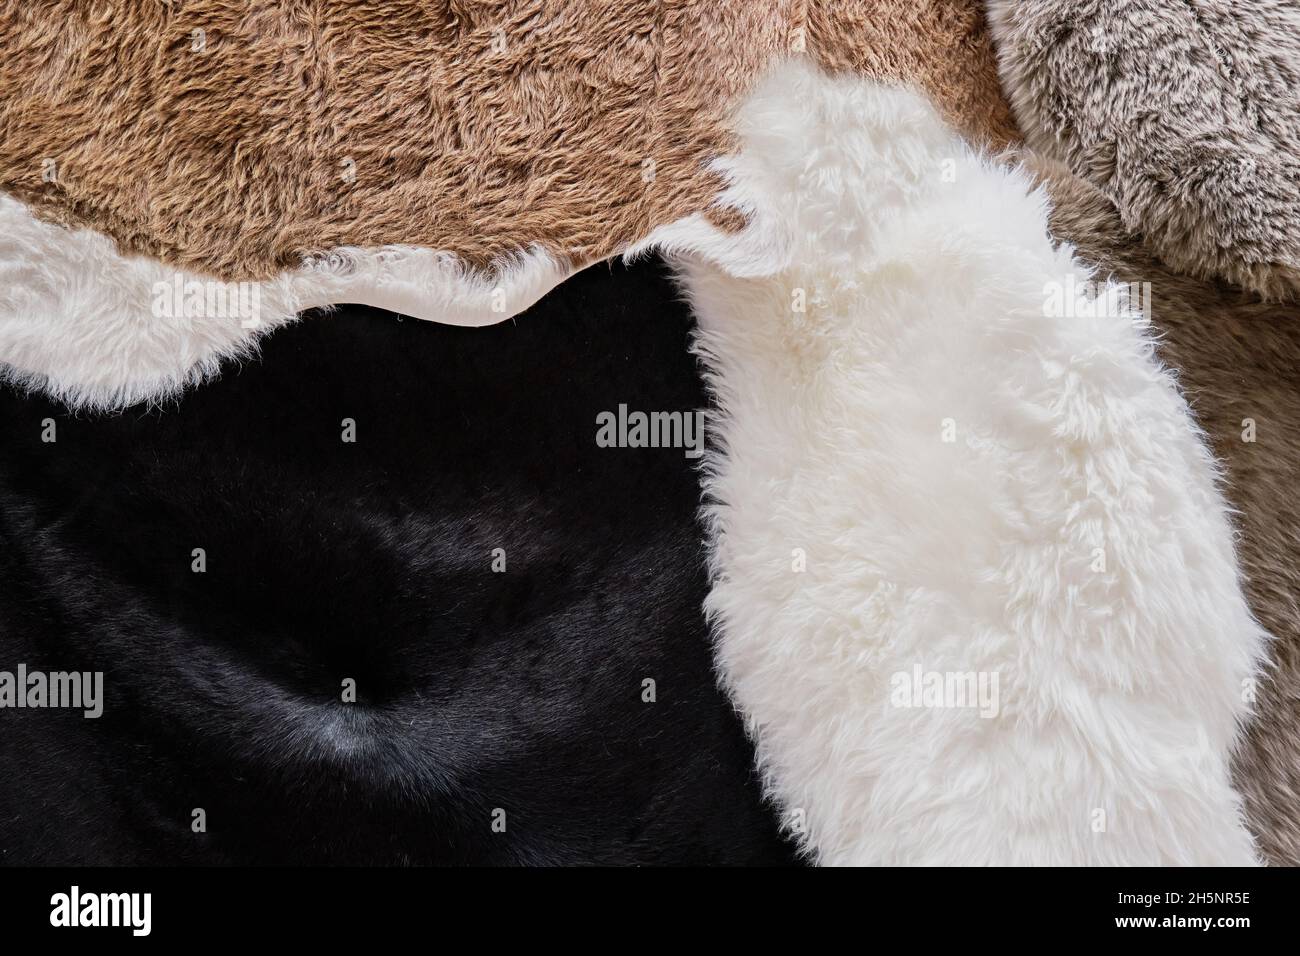 Background in form of texture of natural fur in brown, black and white colors Stock Photo